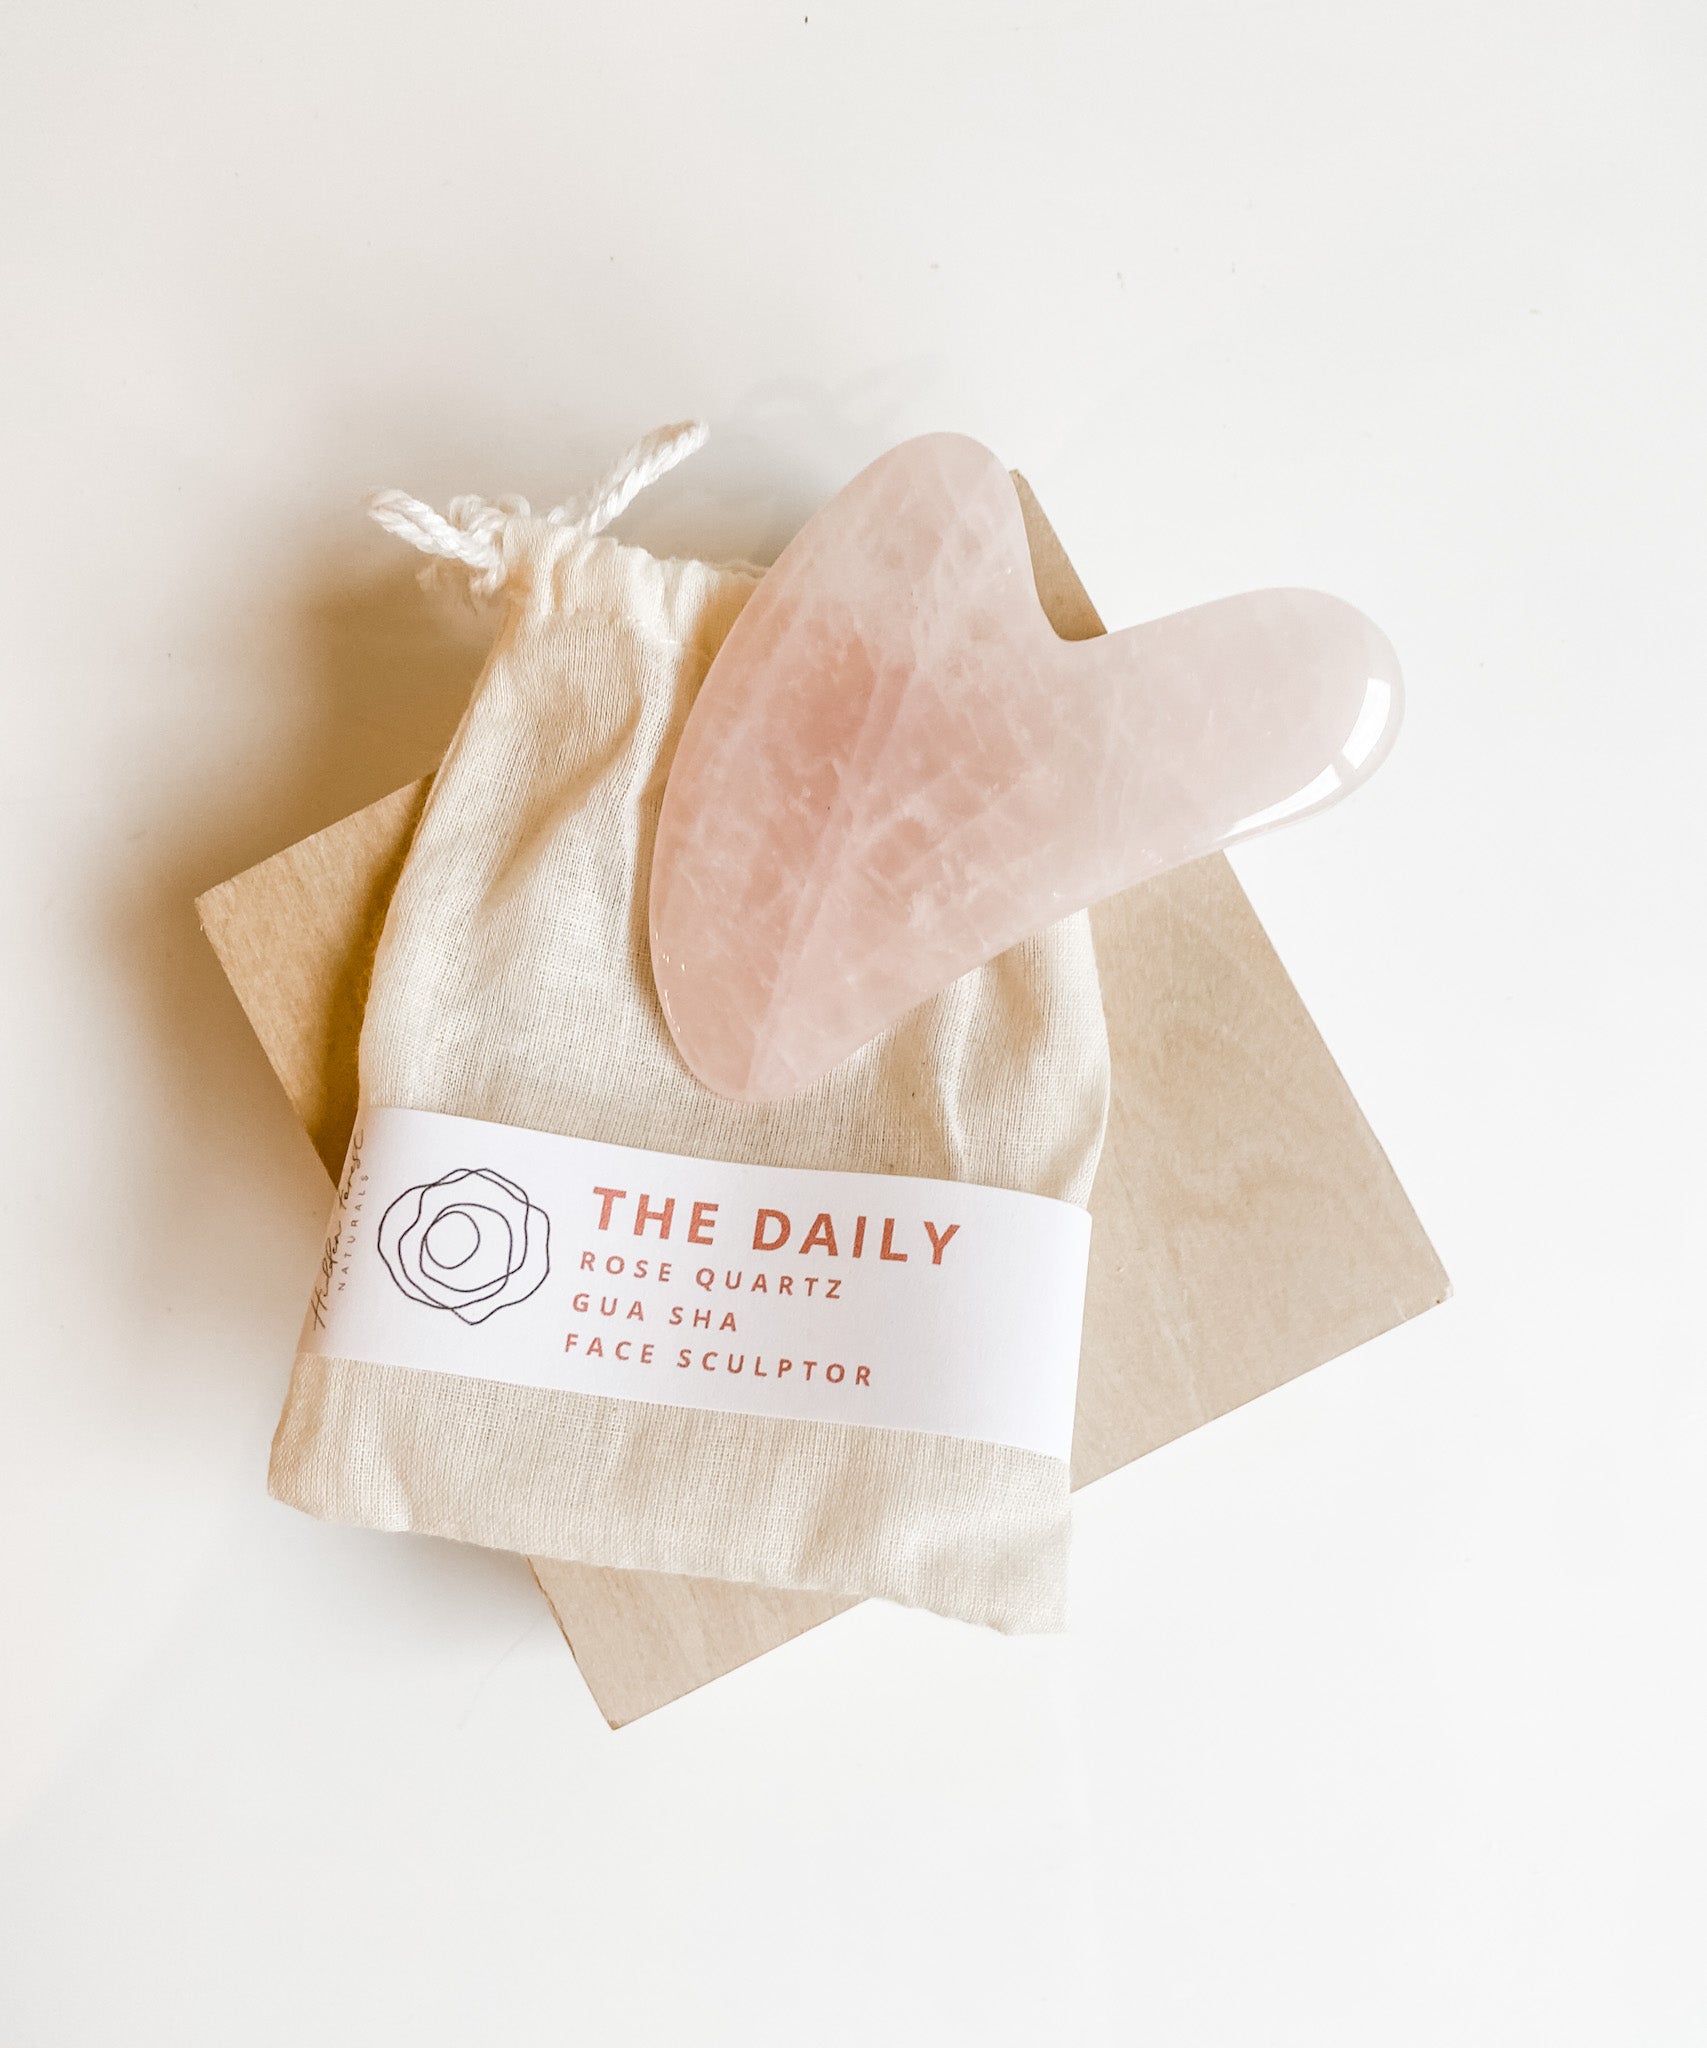 The Daily Gua Sha Facial Tool - Handmade with Natural Ingredients. Hidden Forest Naturals